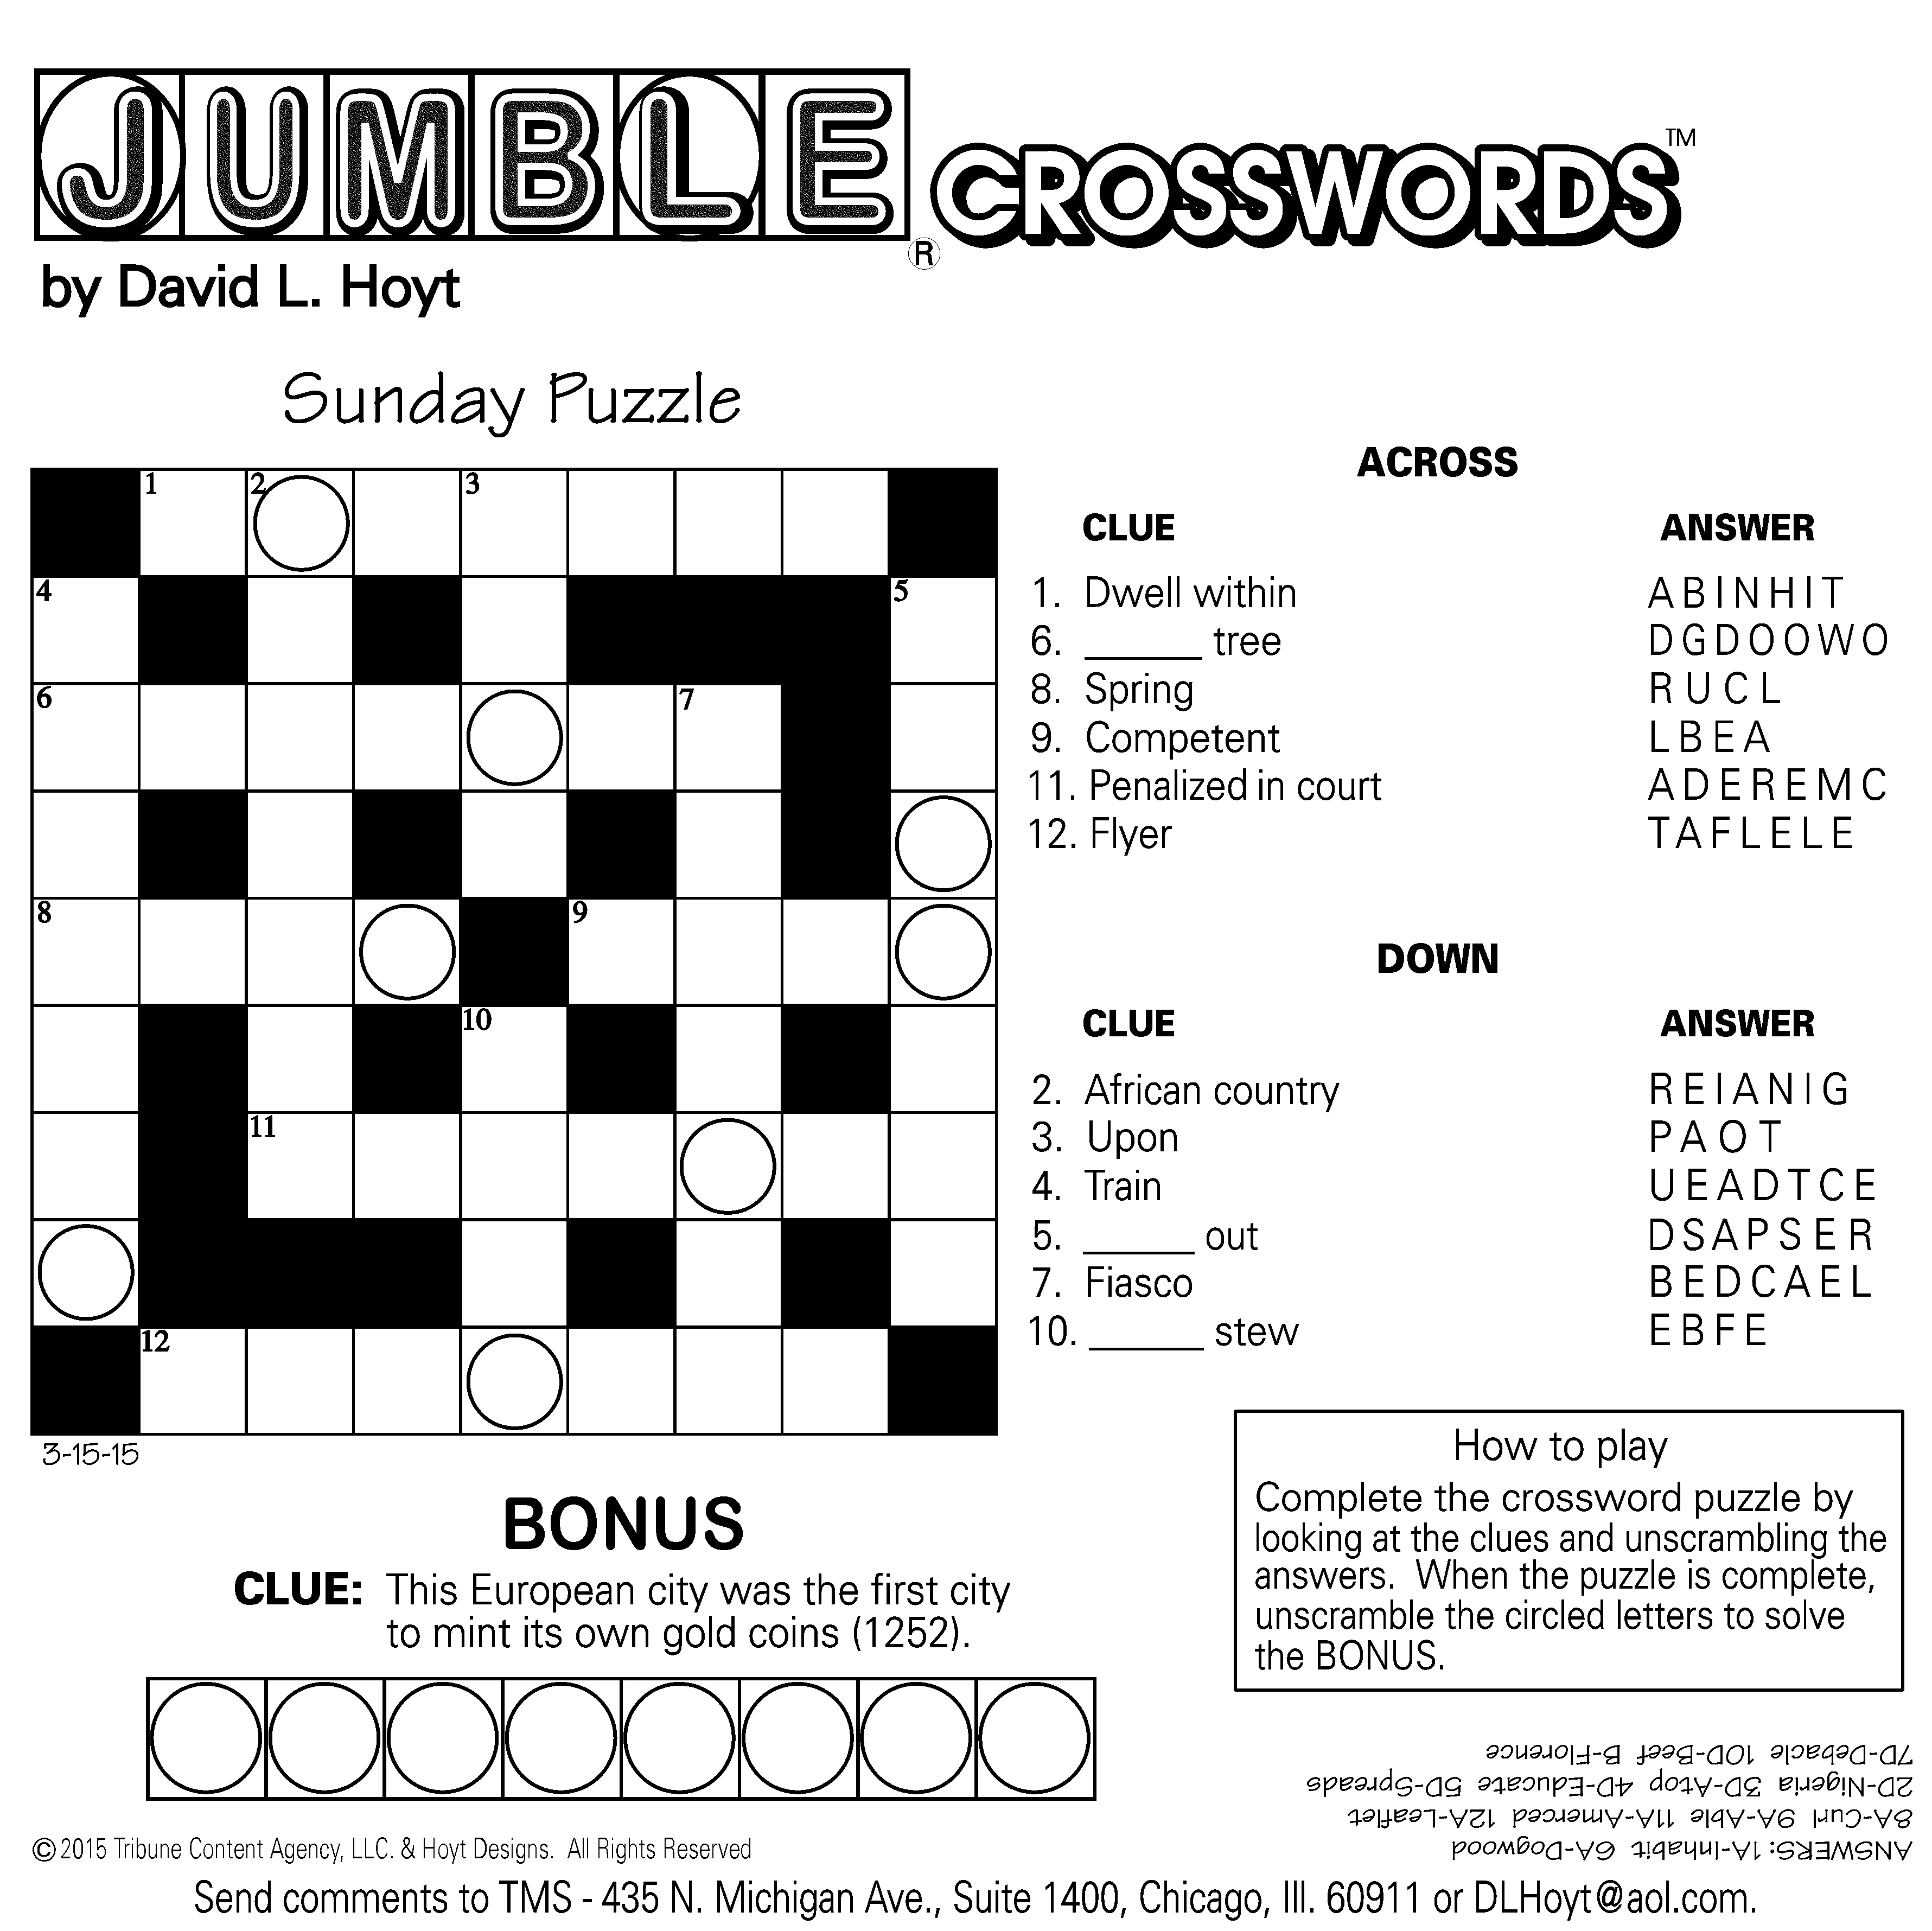 Commuter Crossword Puzzle Free - THE Daily Commuter Puzzle | The Daily